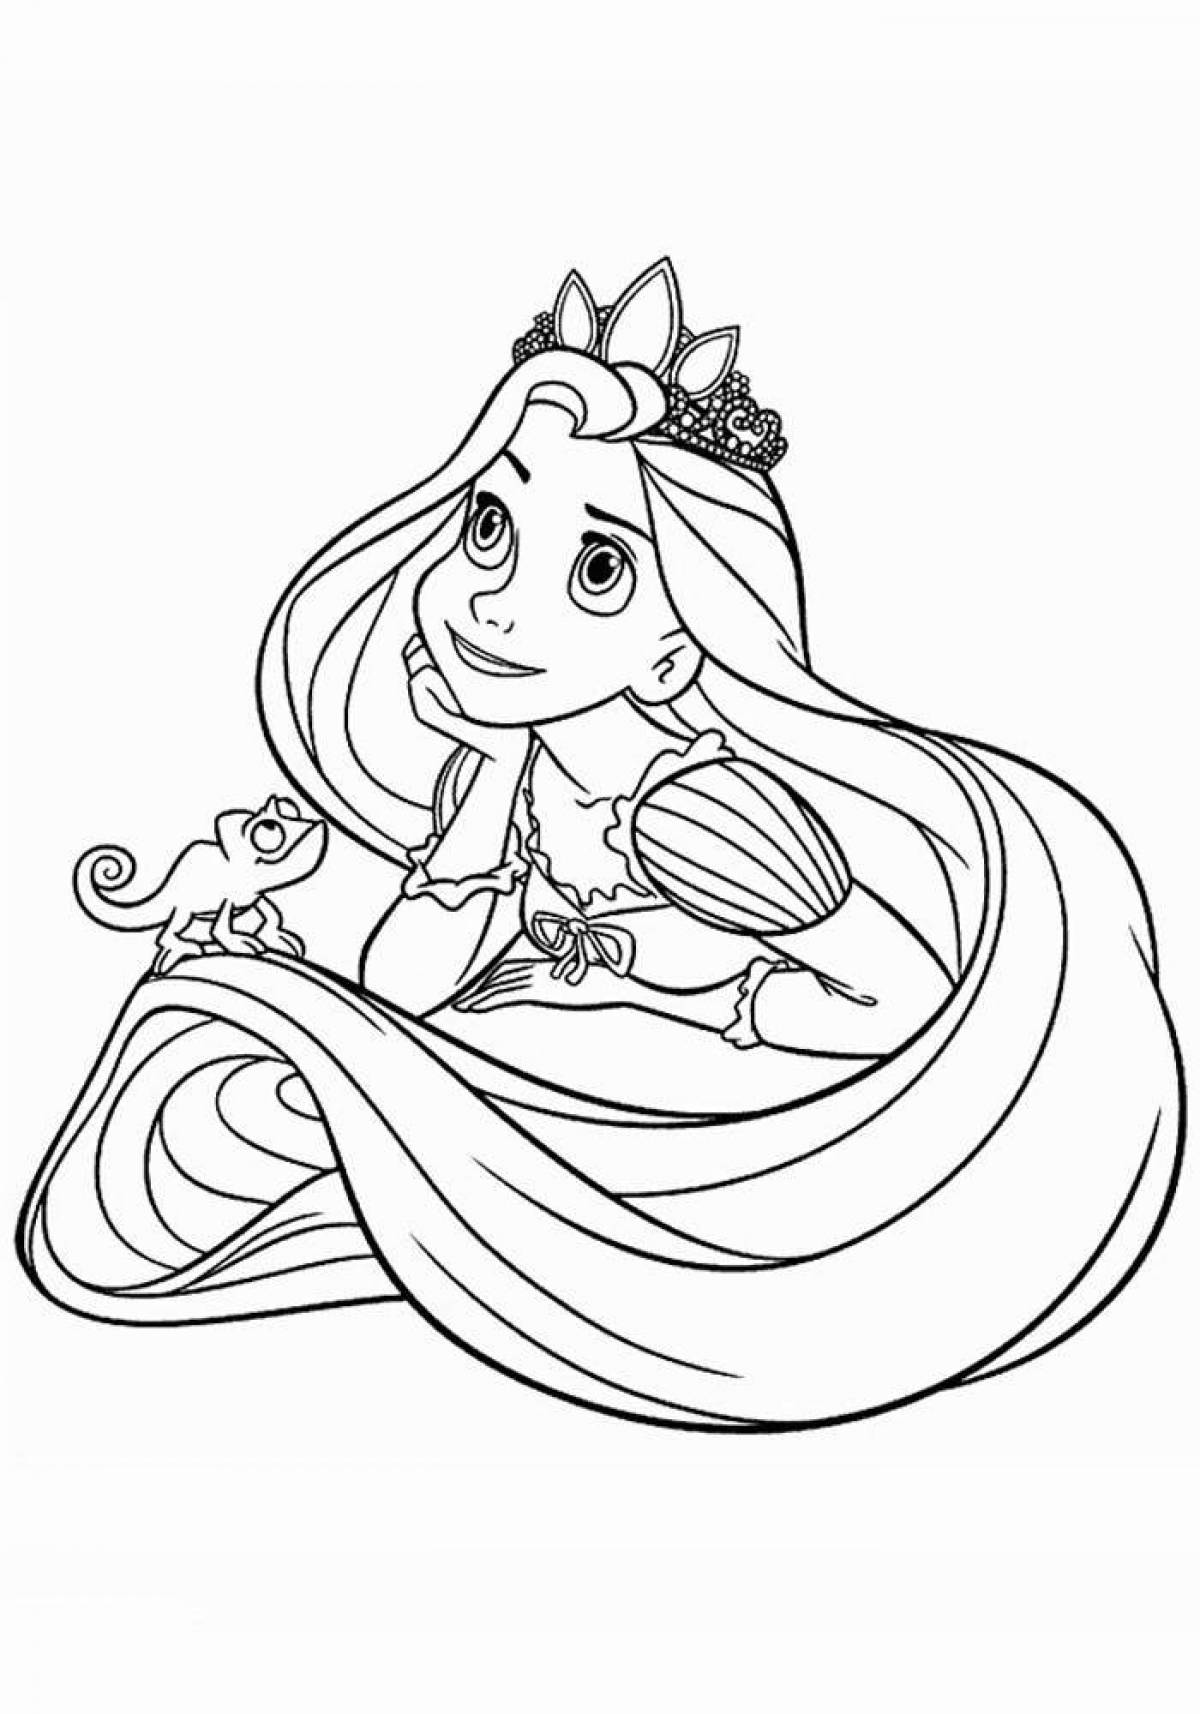 Radiant incantimals coloring page